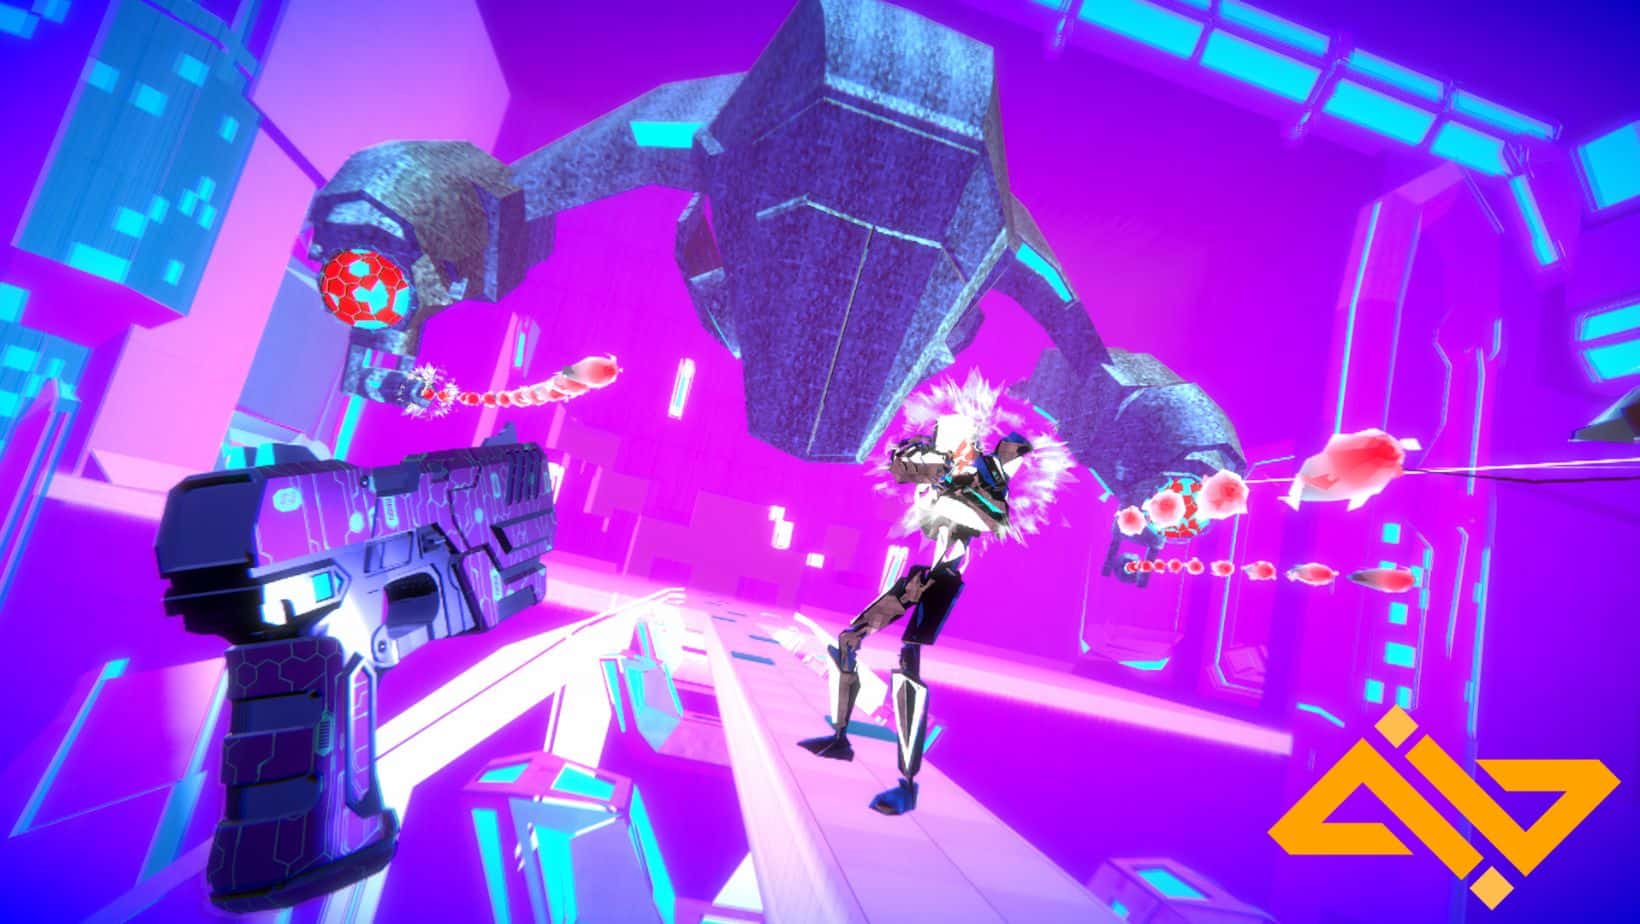 This title is a fun VR rhythm shooter game that doesn’t stop short of making you feel like you’re a fearless action superstar.